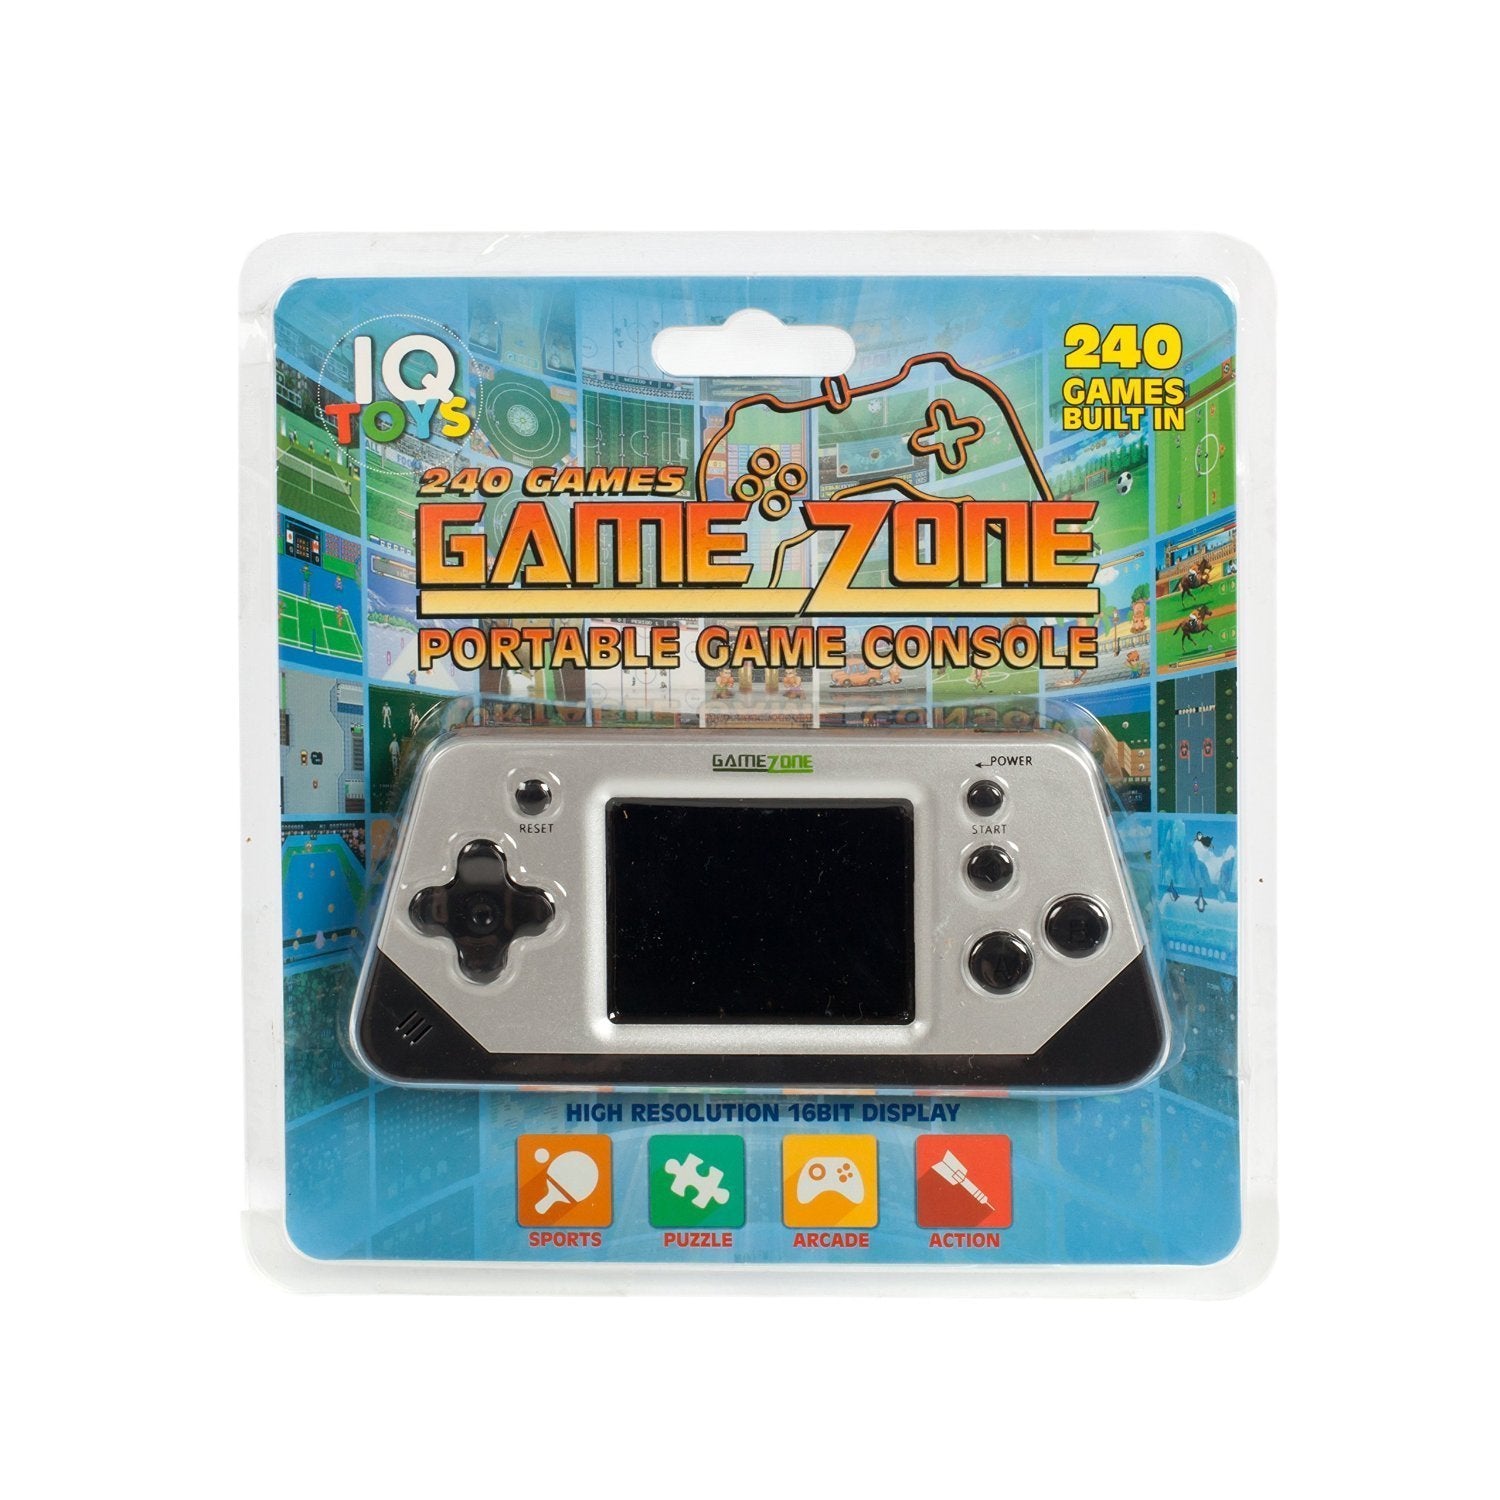 preloaded handheld games console